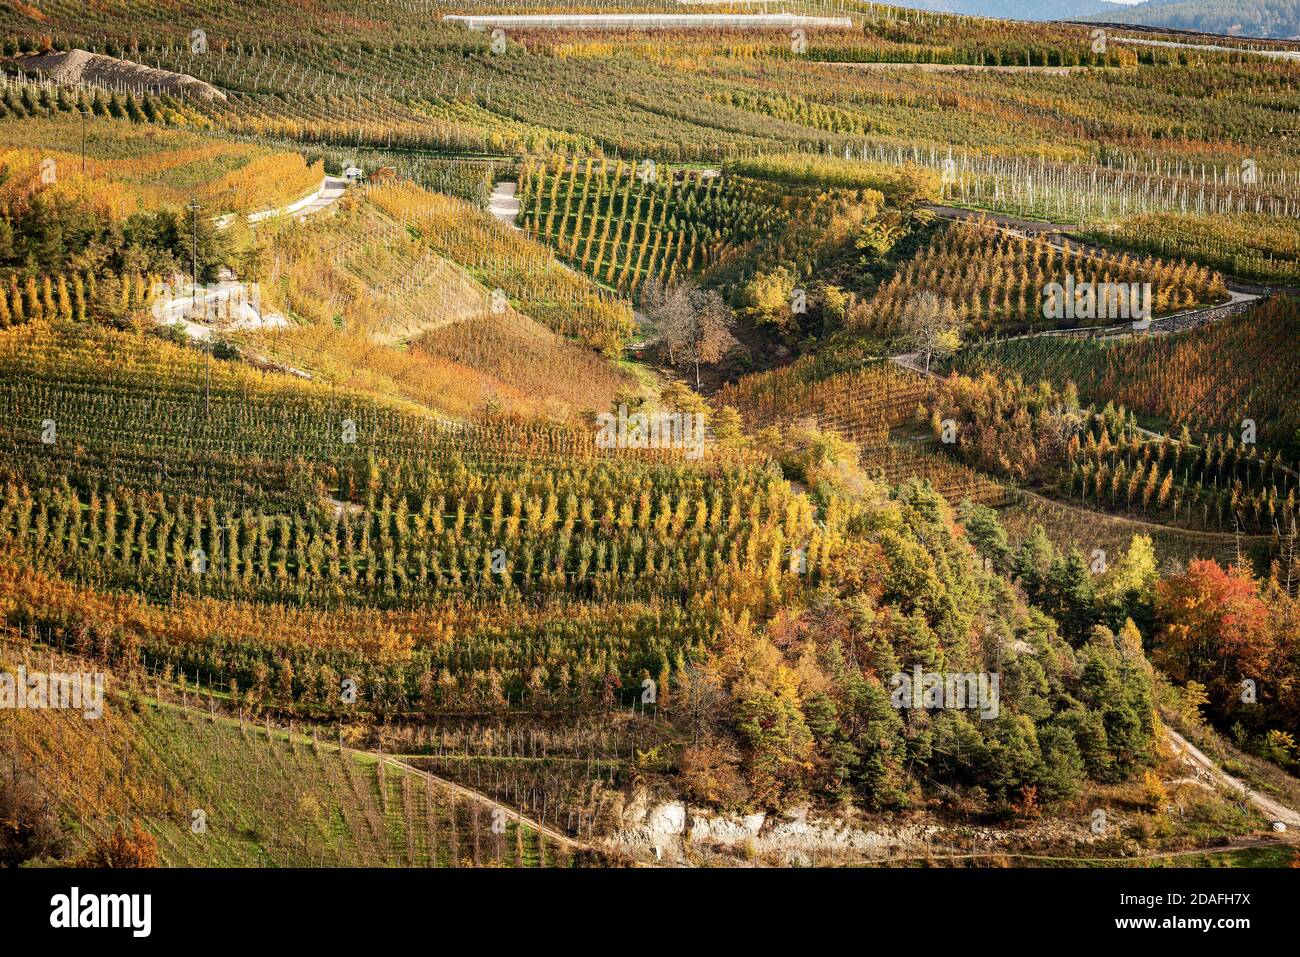 Apple Orchard (Golden Delicious Apple) in Autumn seen from above, Trentino-Alto Adige, Trento Province, Italy, southern Europe. Stock Photo